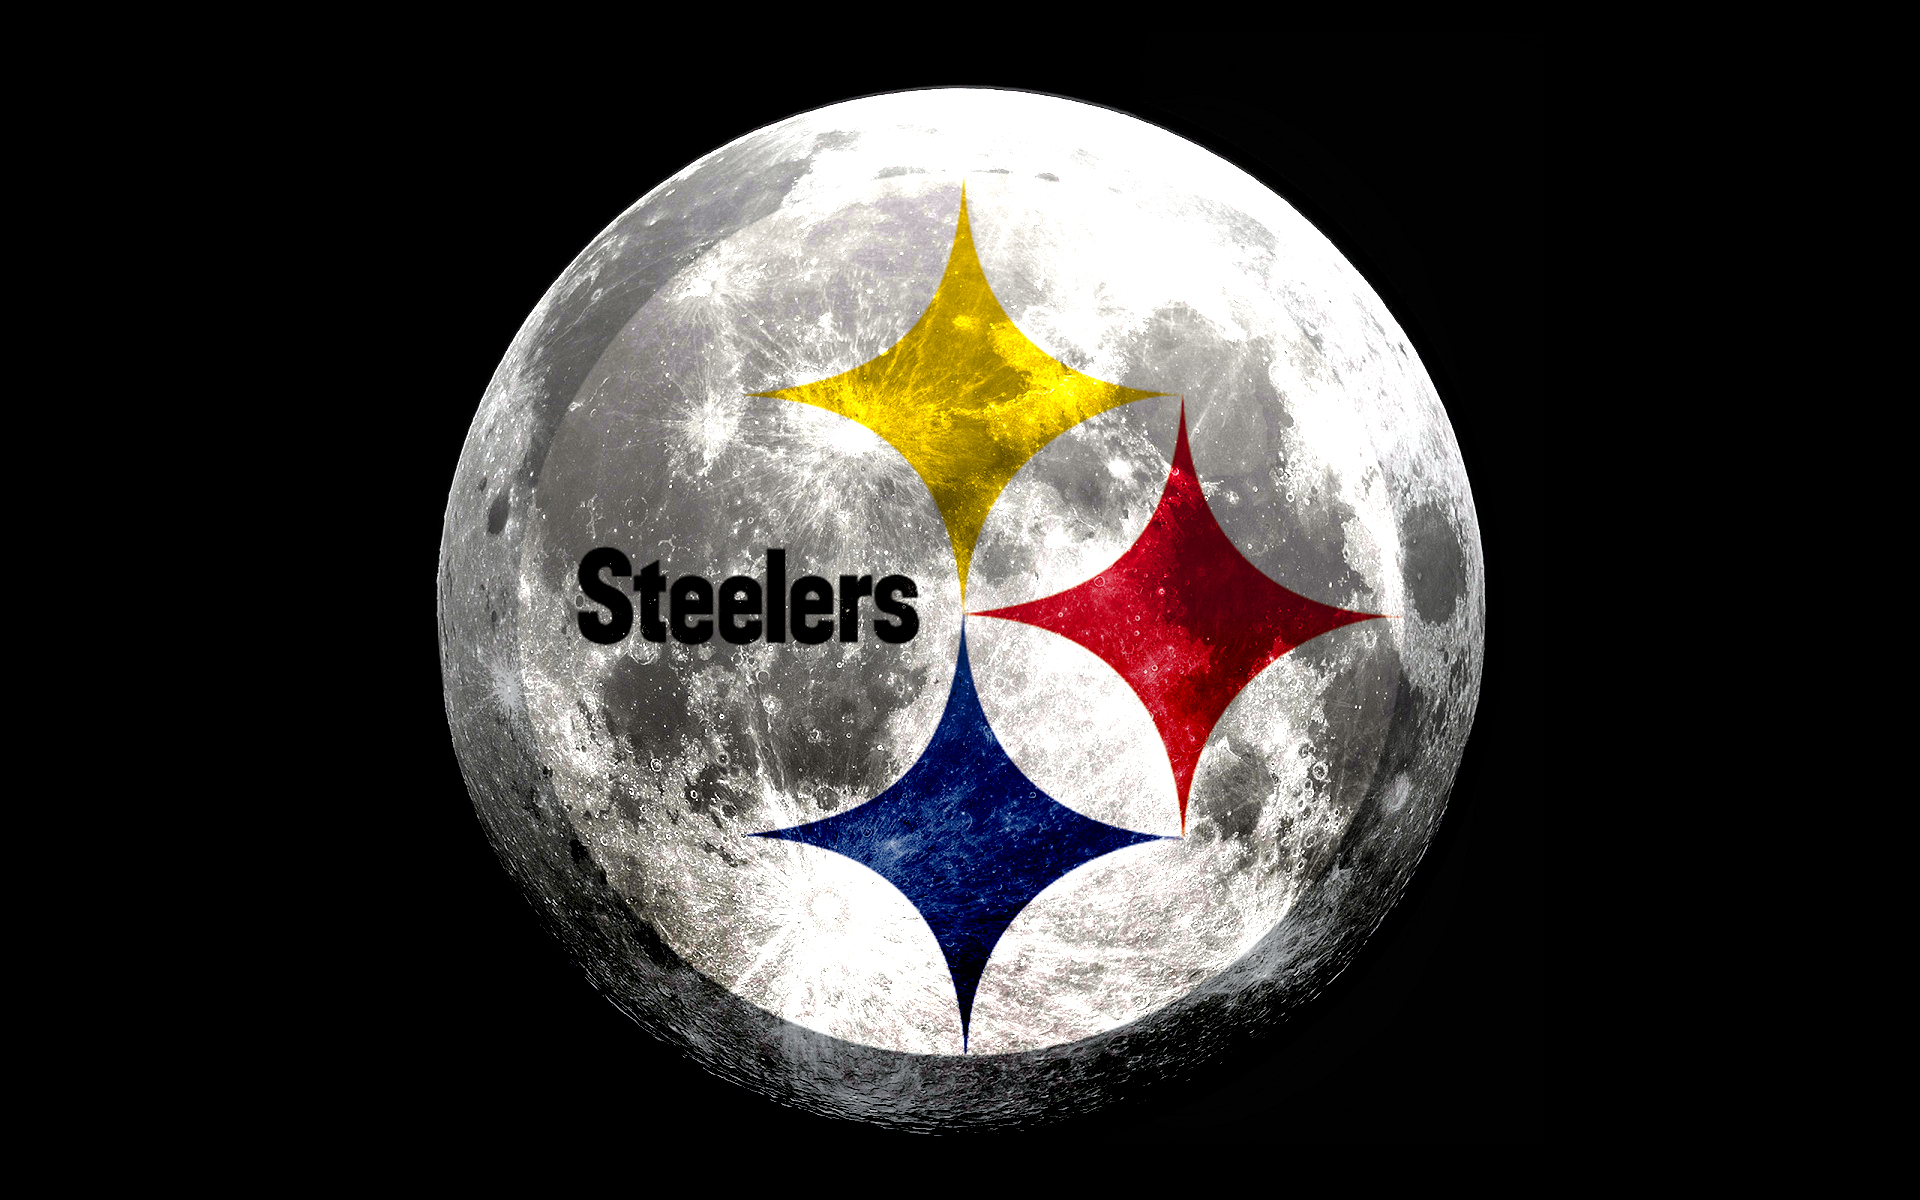 More Steelers Wallpaper Loaded Up